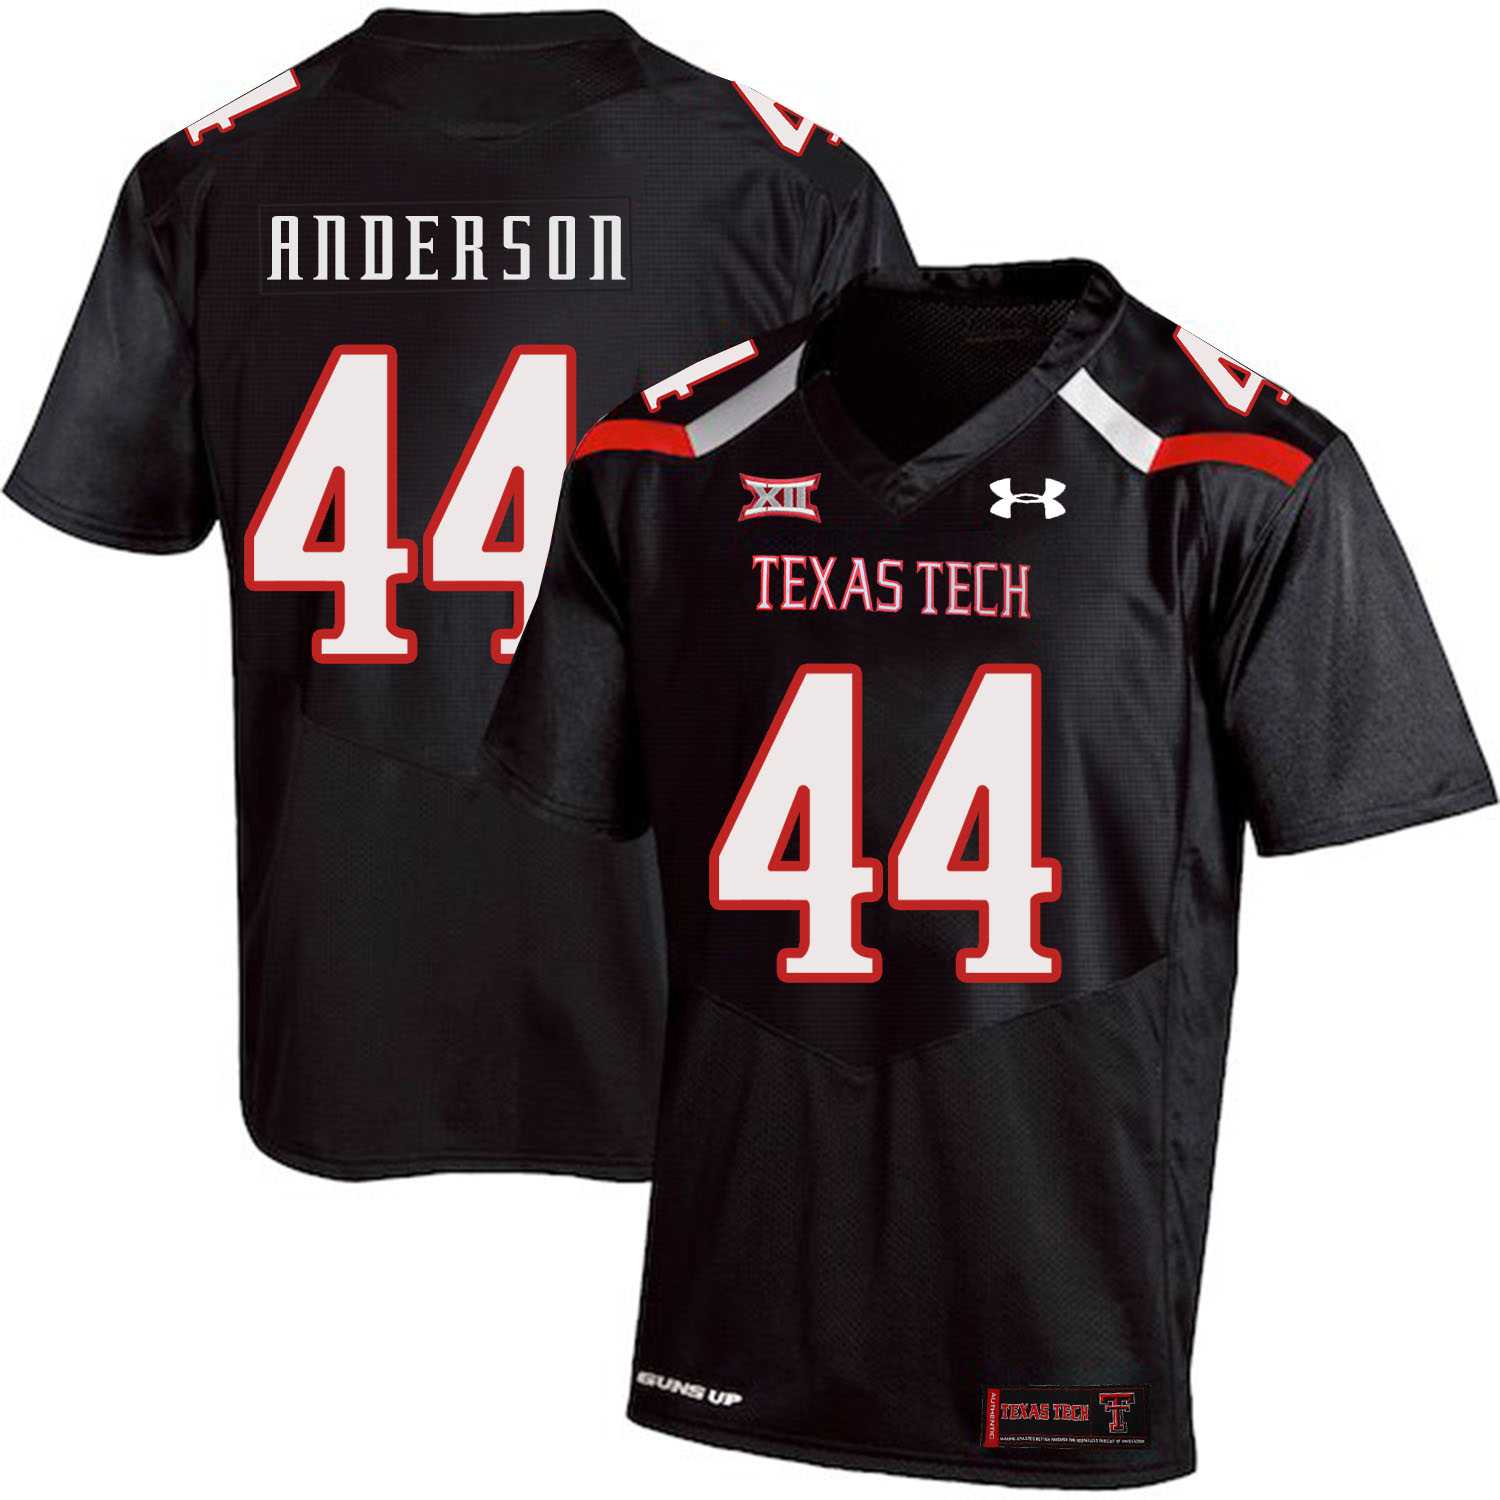 Texas Tech Red Raiders 44 Donny Anderson Black College Football Jersey Dzhi